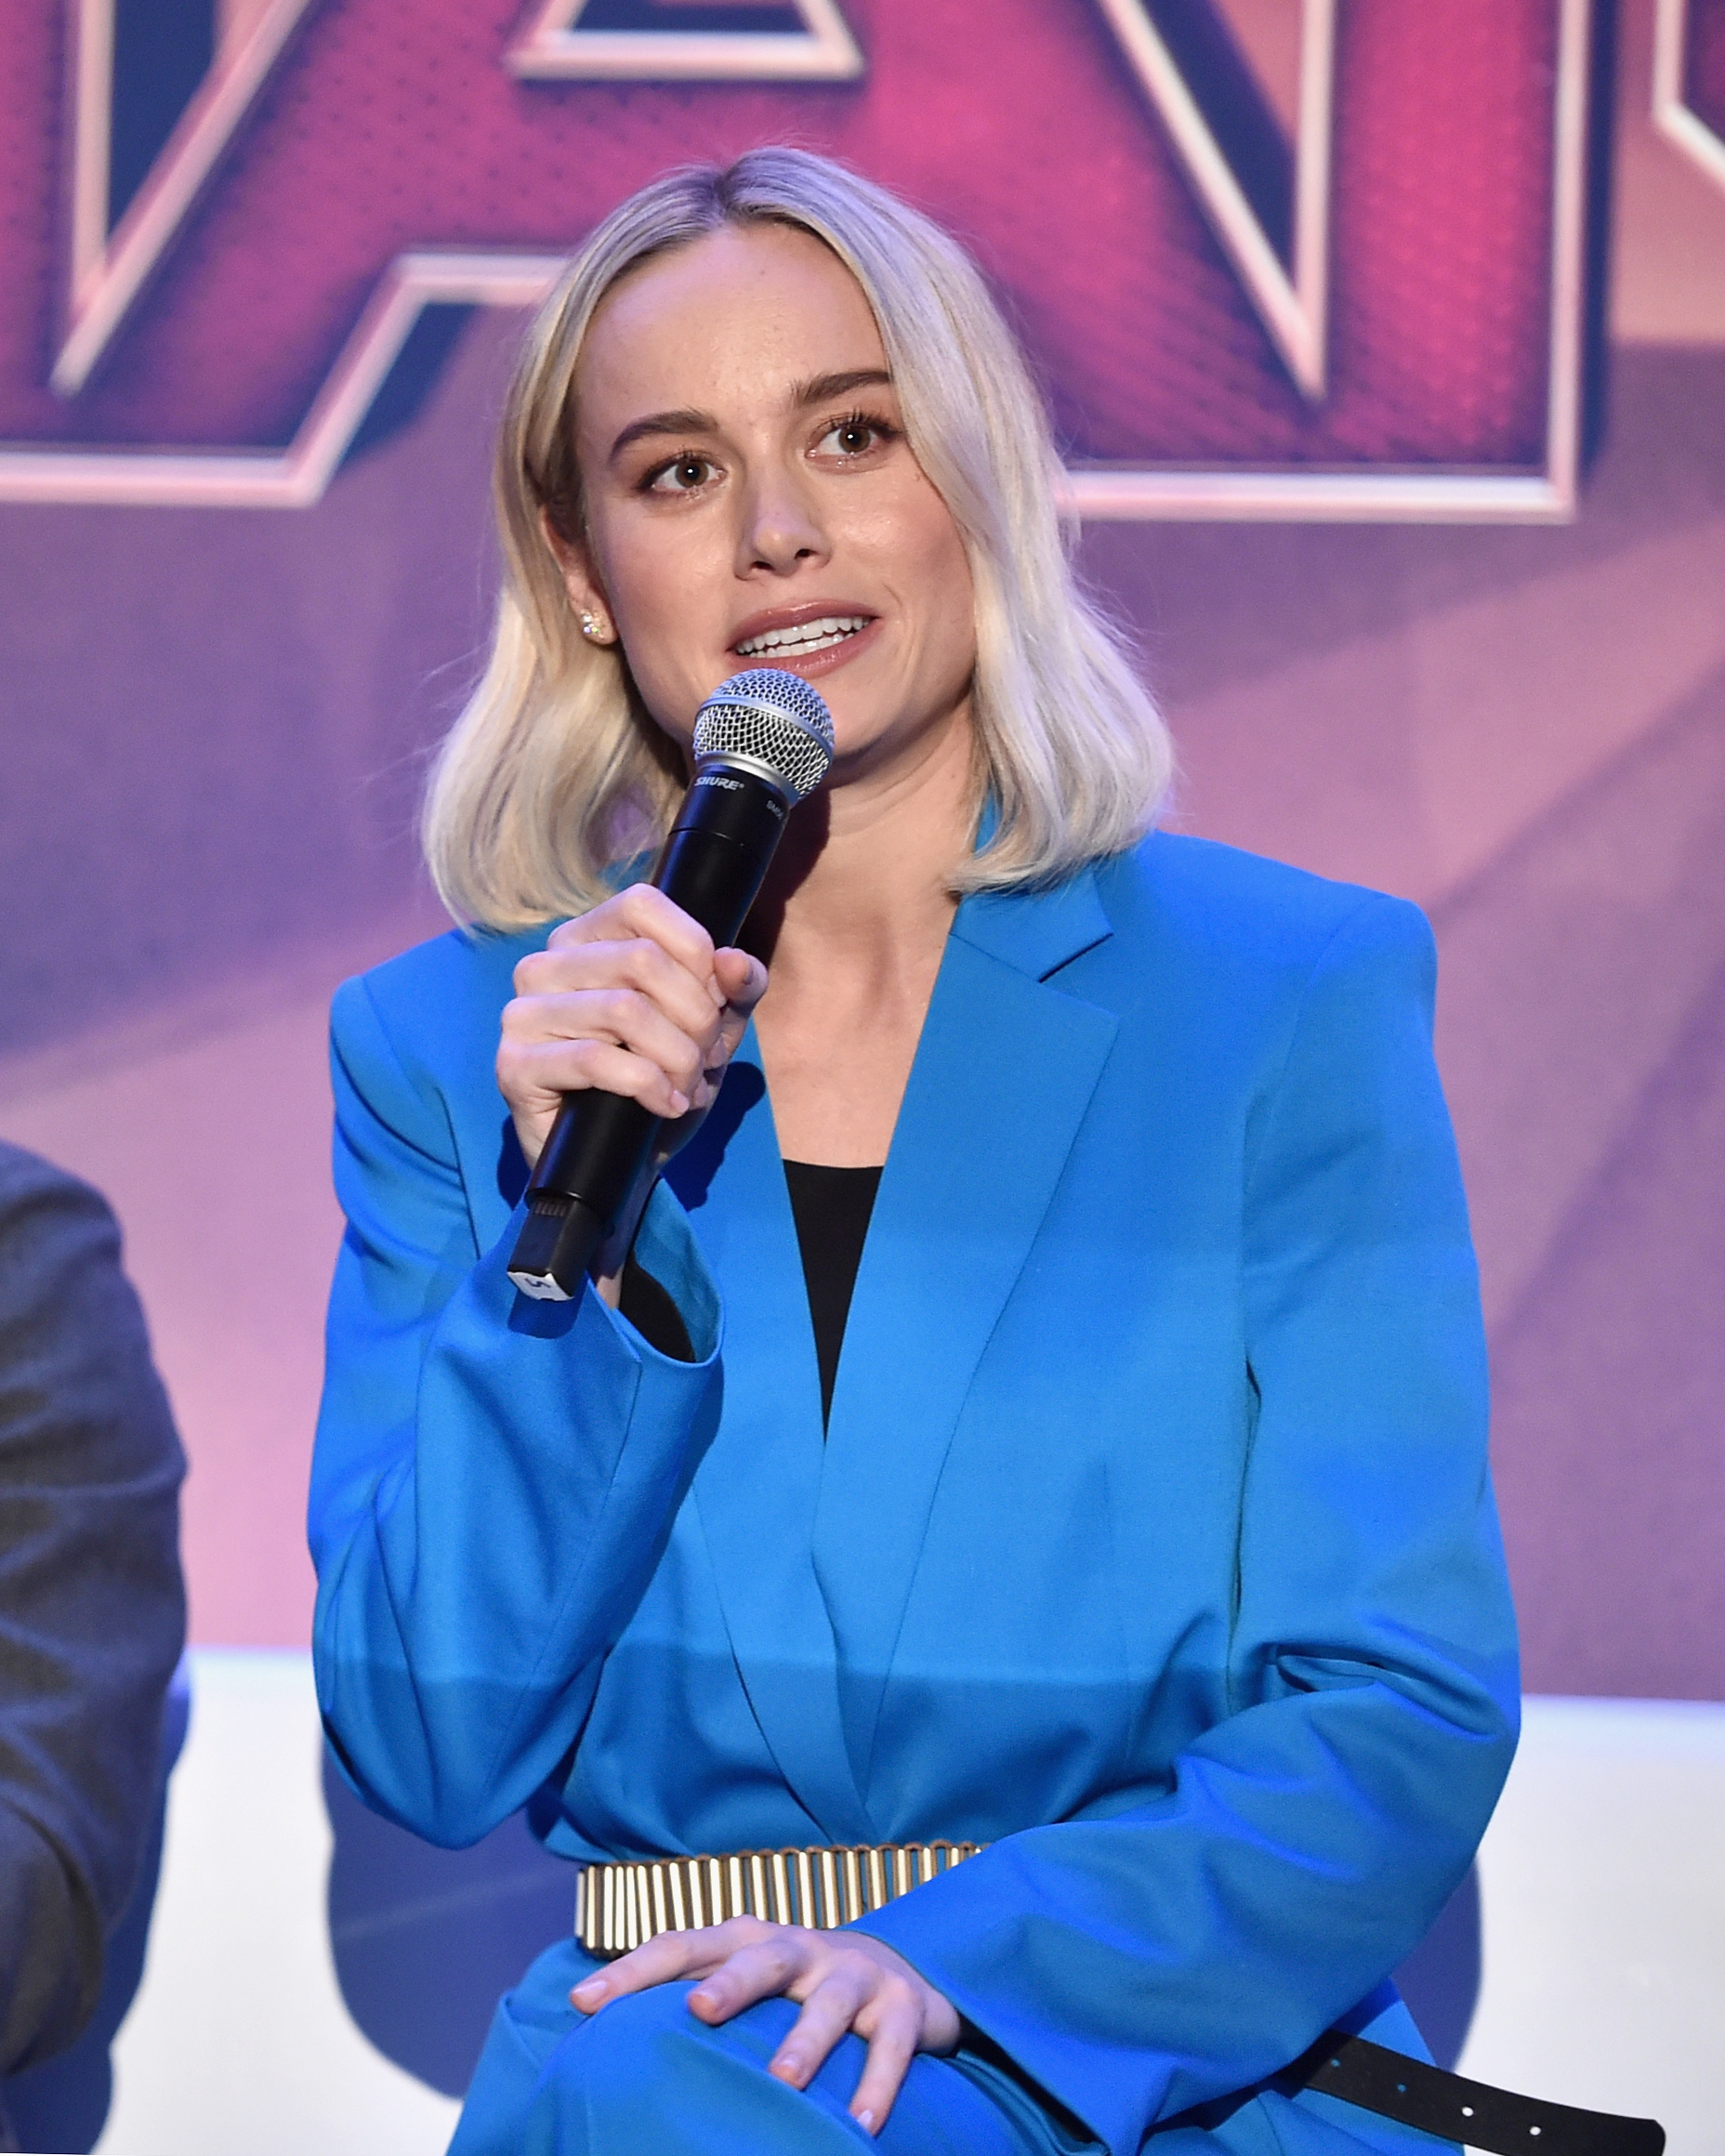  Actor Brie Larson speaks onstage during Marvel Studios' "Captain Marvel" Global Junket Press Conference at The Beverly Hilton Hotel on February 22, 2019 in Beverly Hills, California.